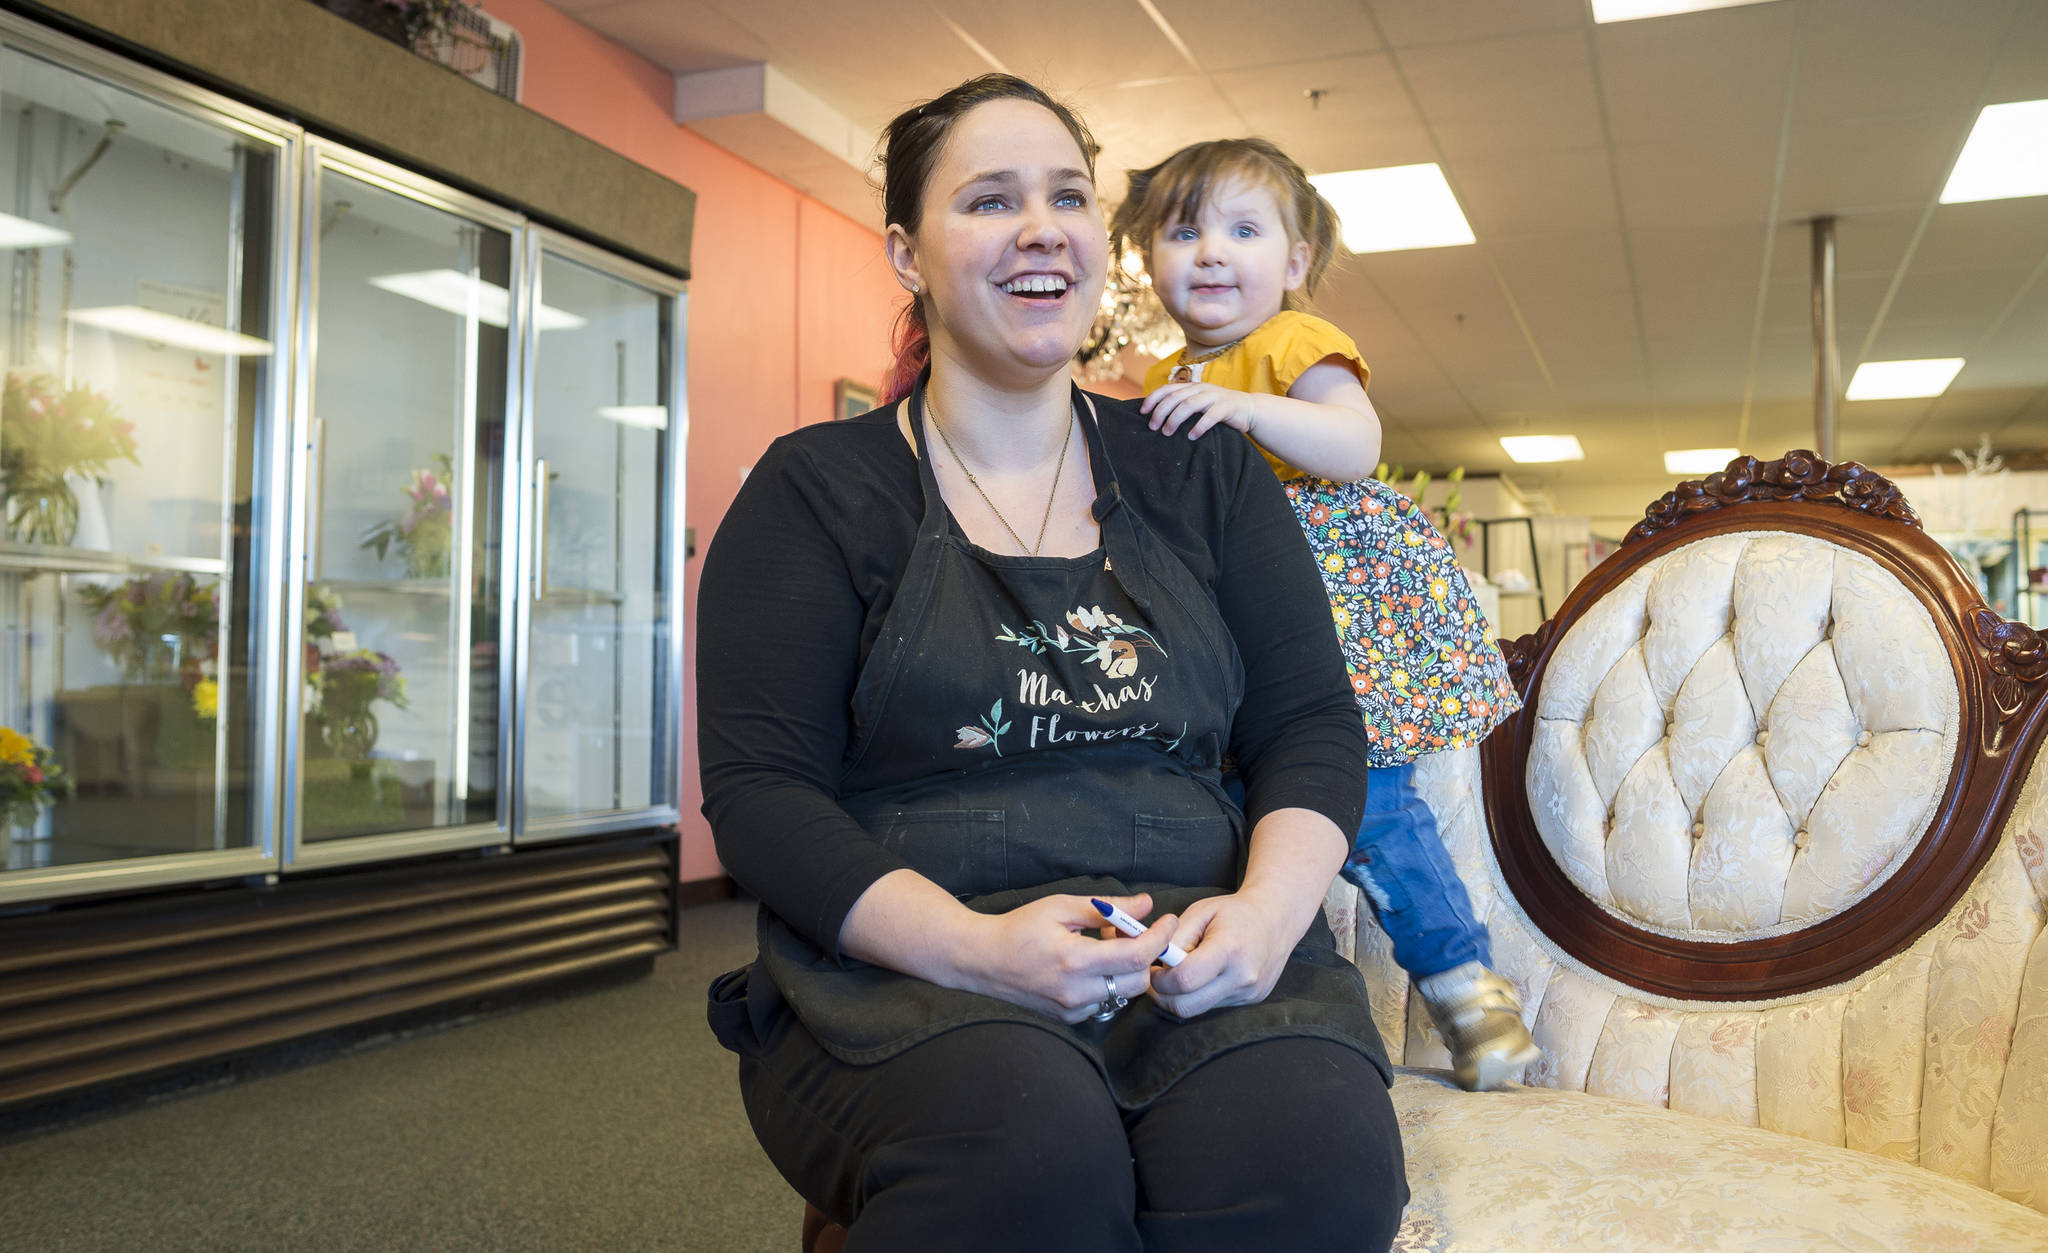 Debrah Clements, with her 19-month-old daughter, Ezmae, talks about the airport shopping district at their shop, Martha’s Flowers, in the Airport Shopping Center on Friday, Feb. 9, 2018. (Michael Penn | Juneau Empire)